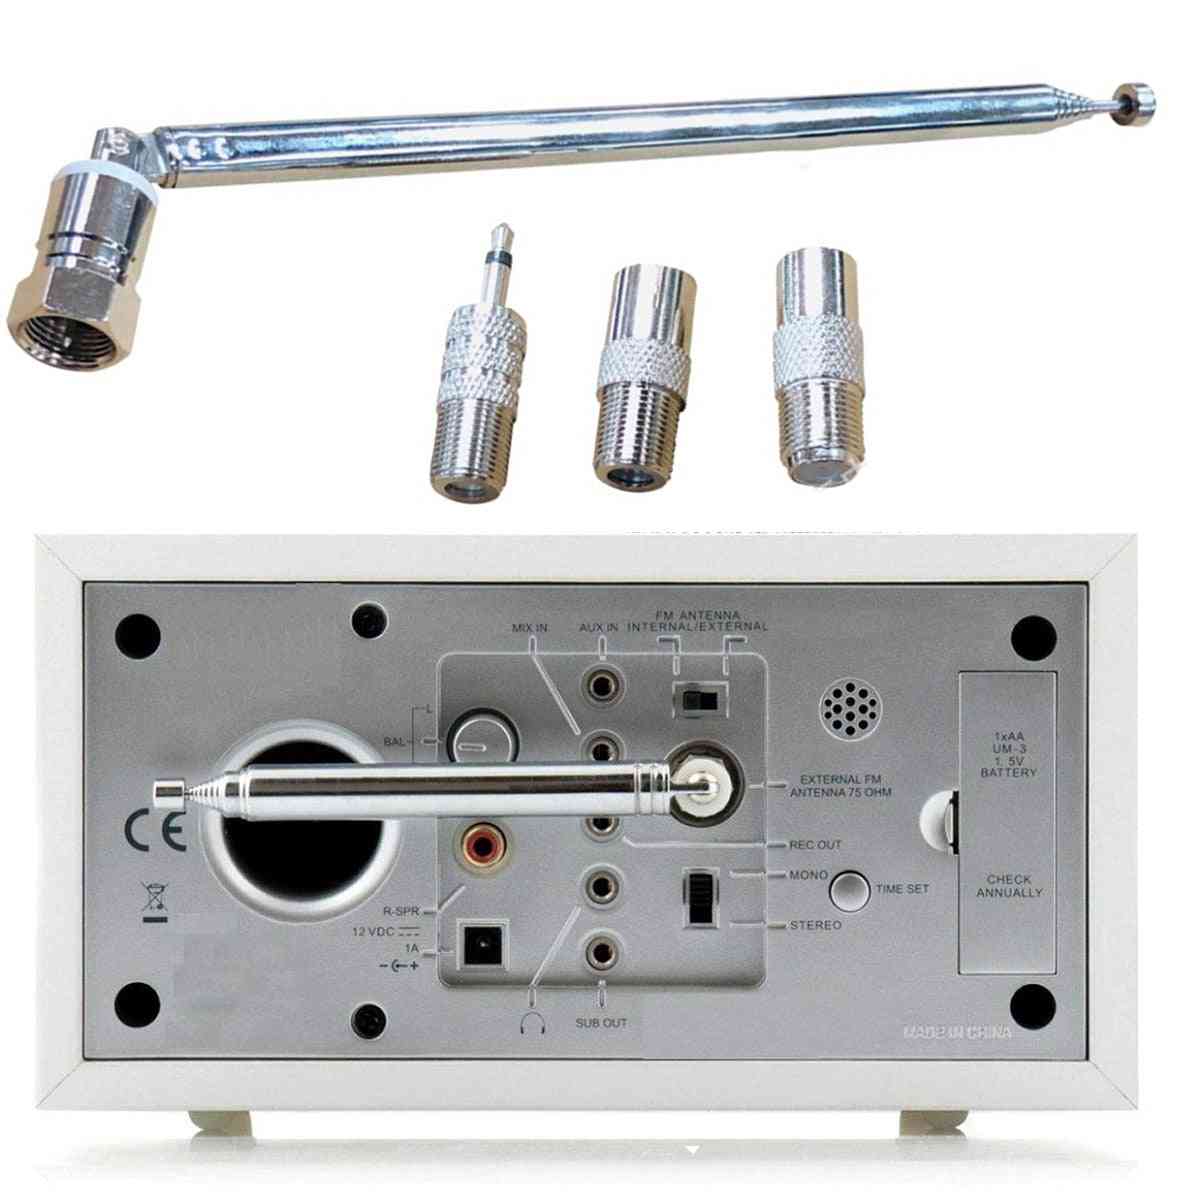 Radio Male Telescopic Antenna With Adapters